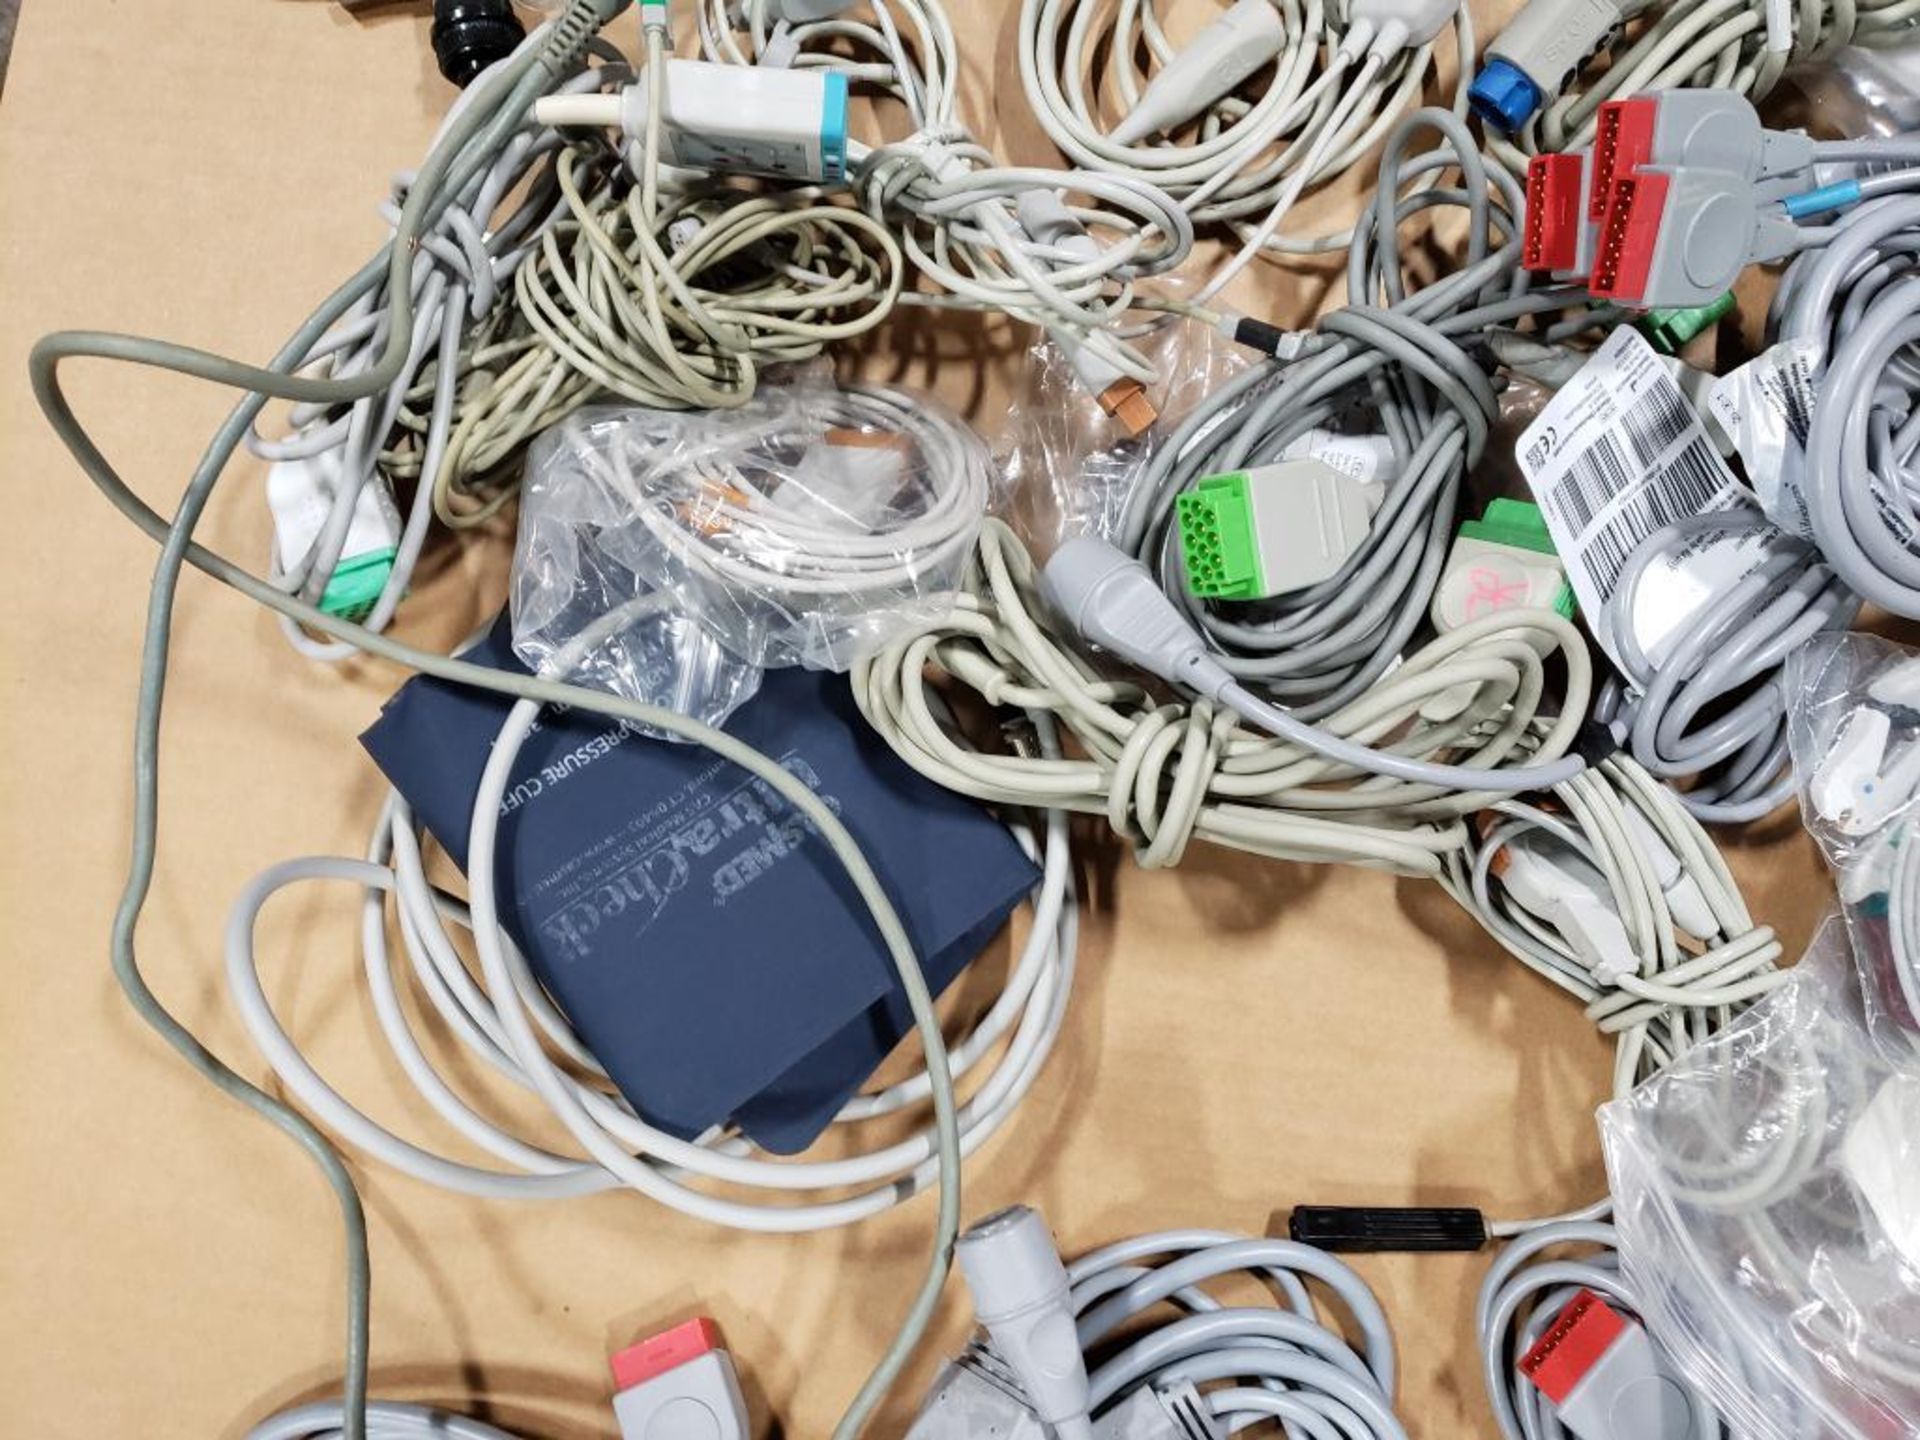 Large assortment of cords and cables. - Image 9 of 11